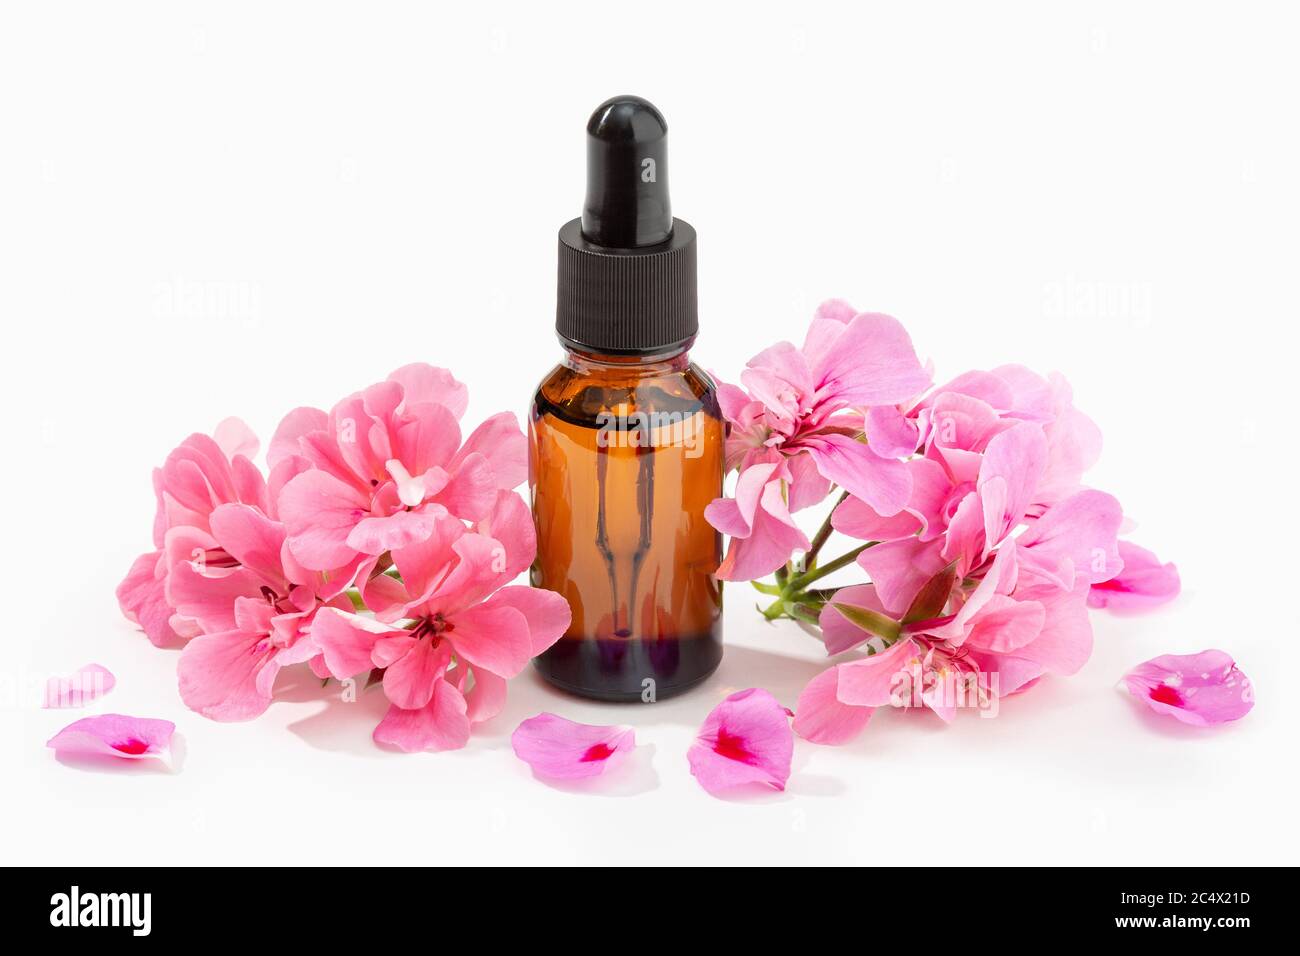 Geranium essential oil on amber bottle isolated on white background. Herbal oil Stock Photo